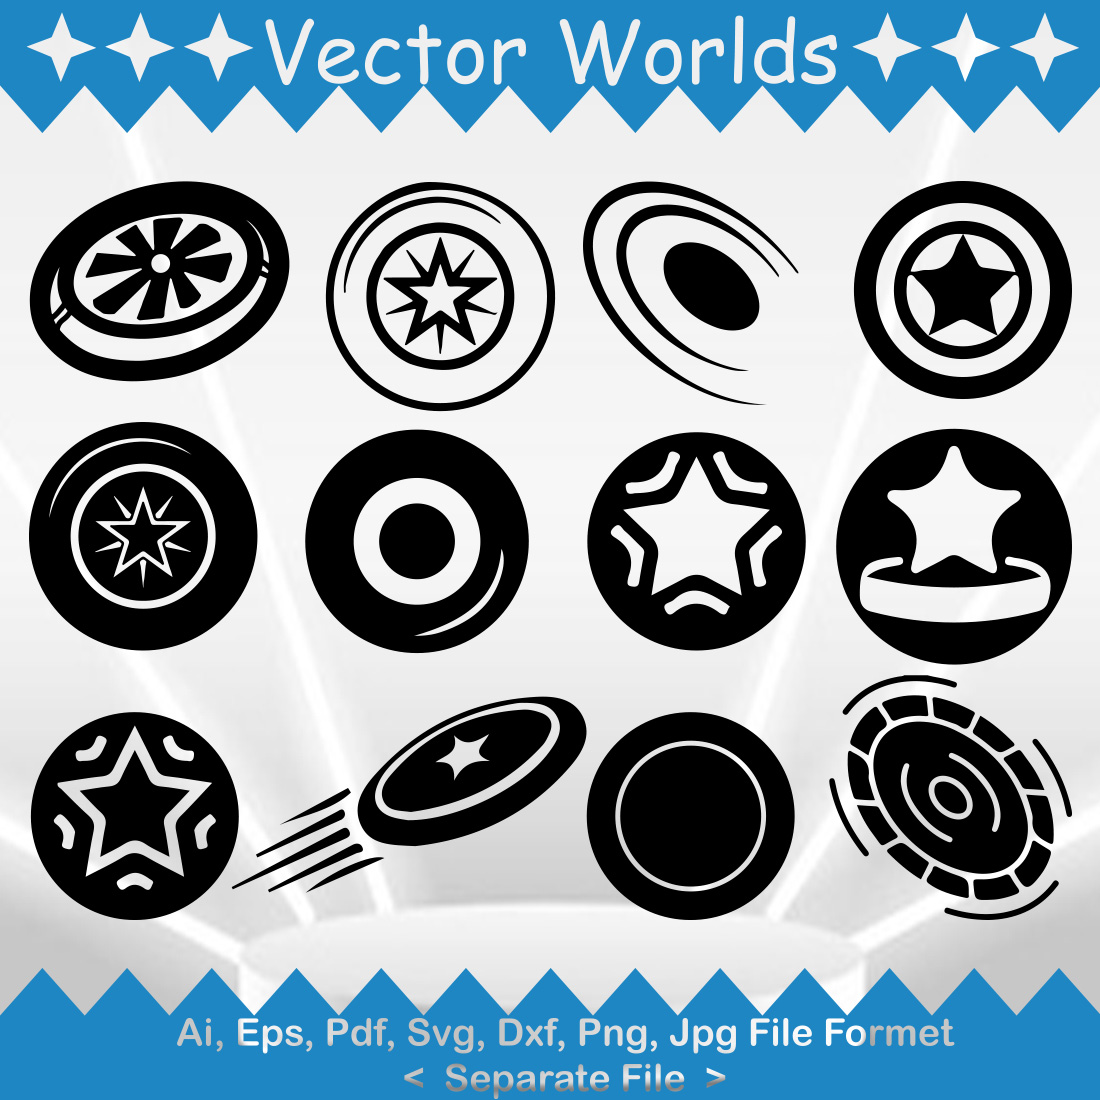 Frisbee SVG Vector Design cover image.